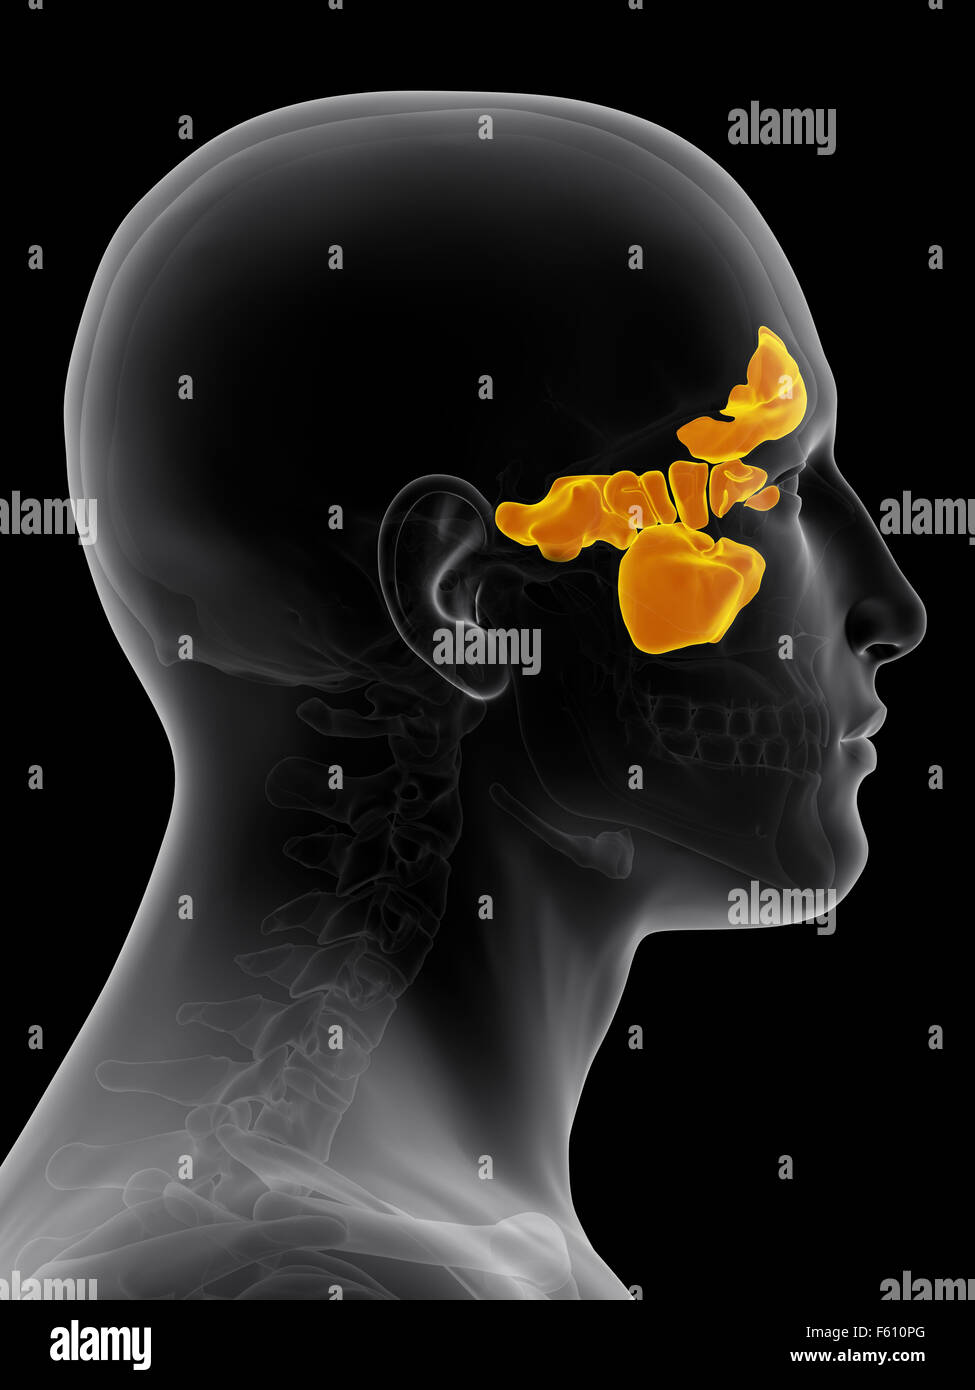 medically accurate illustration of the sinuses Stock Photo